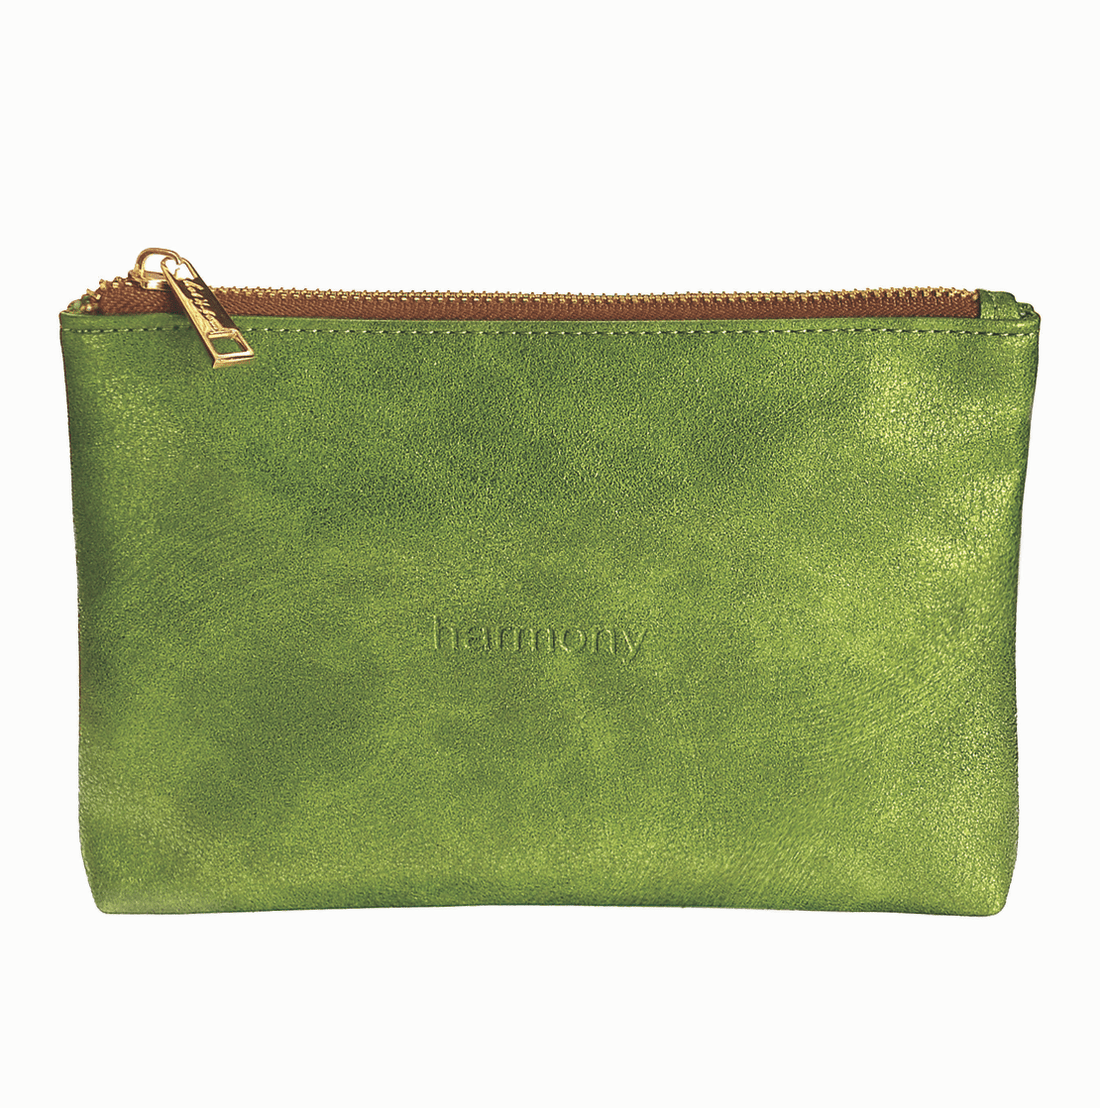 HARMONY Make Up Pouch in Green & Cocoa - WN477 Bags & Purses Hot Tomato